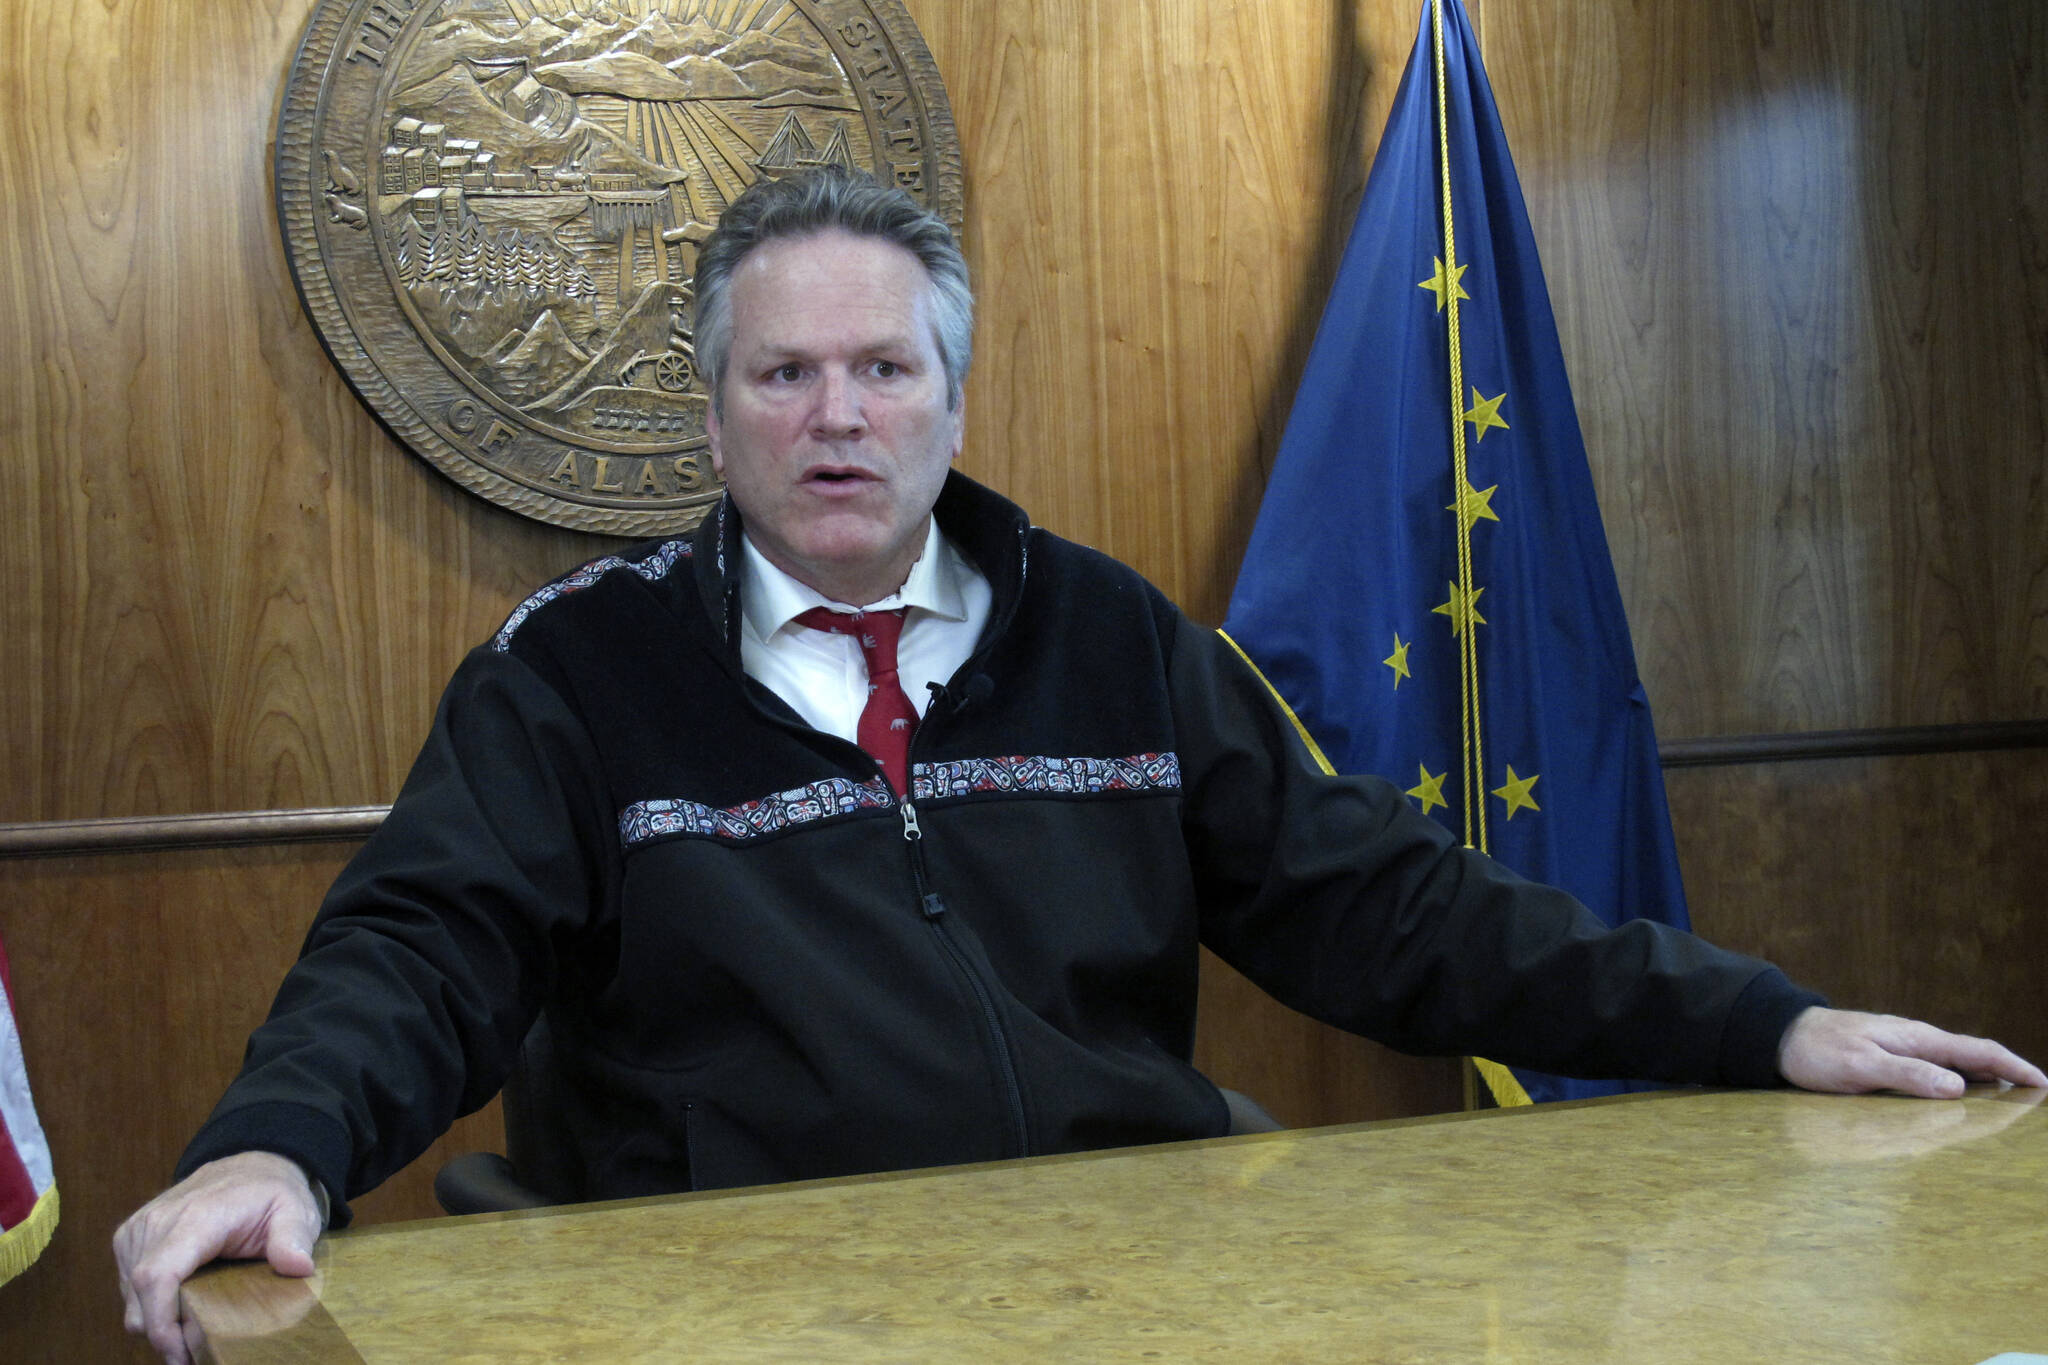 Alaska Gov. Mike Dunleavy speaks with reporters during a news briefing on Tuesday, Sept. 14, 2021, in Juneau, Alaska. Dunleavy said he doesn’t see his acceptance of former President Donald Trump’s endorsement as hurting his relationship with the state’s senior U.S. senator, Republican Lisa Murkowski, who voted to convict Trump at his impeachment trial last year and whom Trump has vowed to fight in her reelection bid. (AP Photo/Becky Bohrer,File)